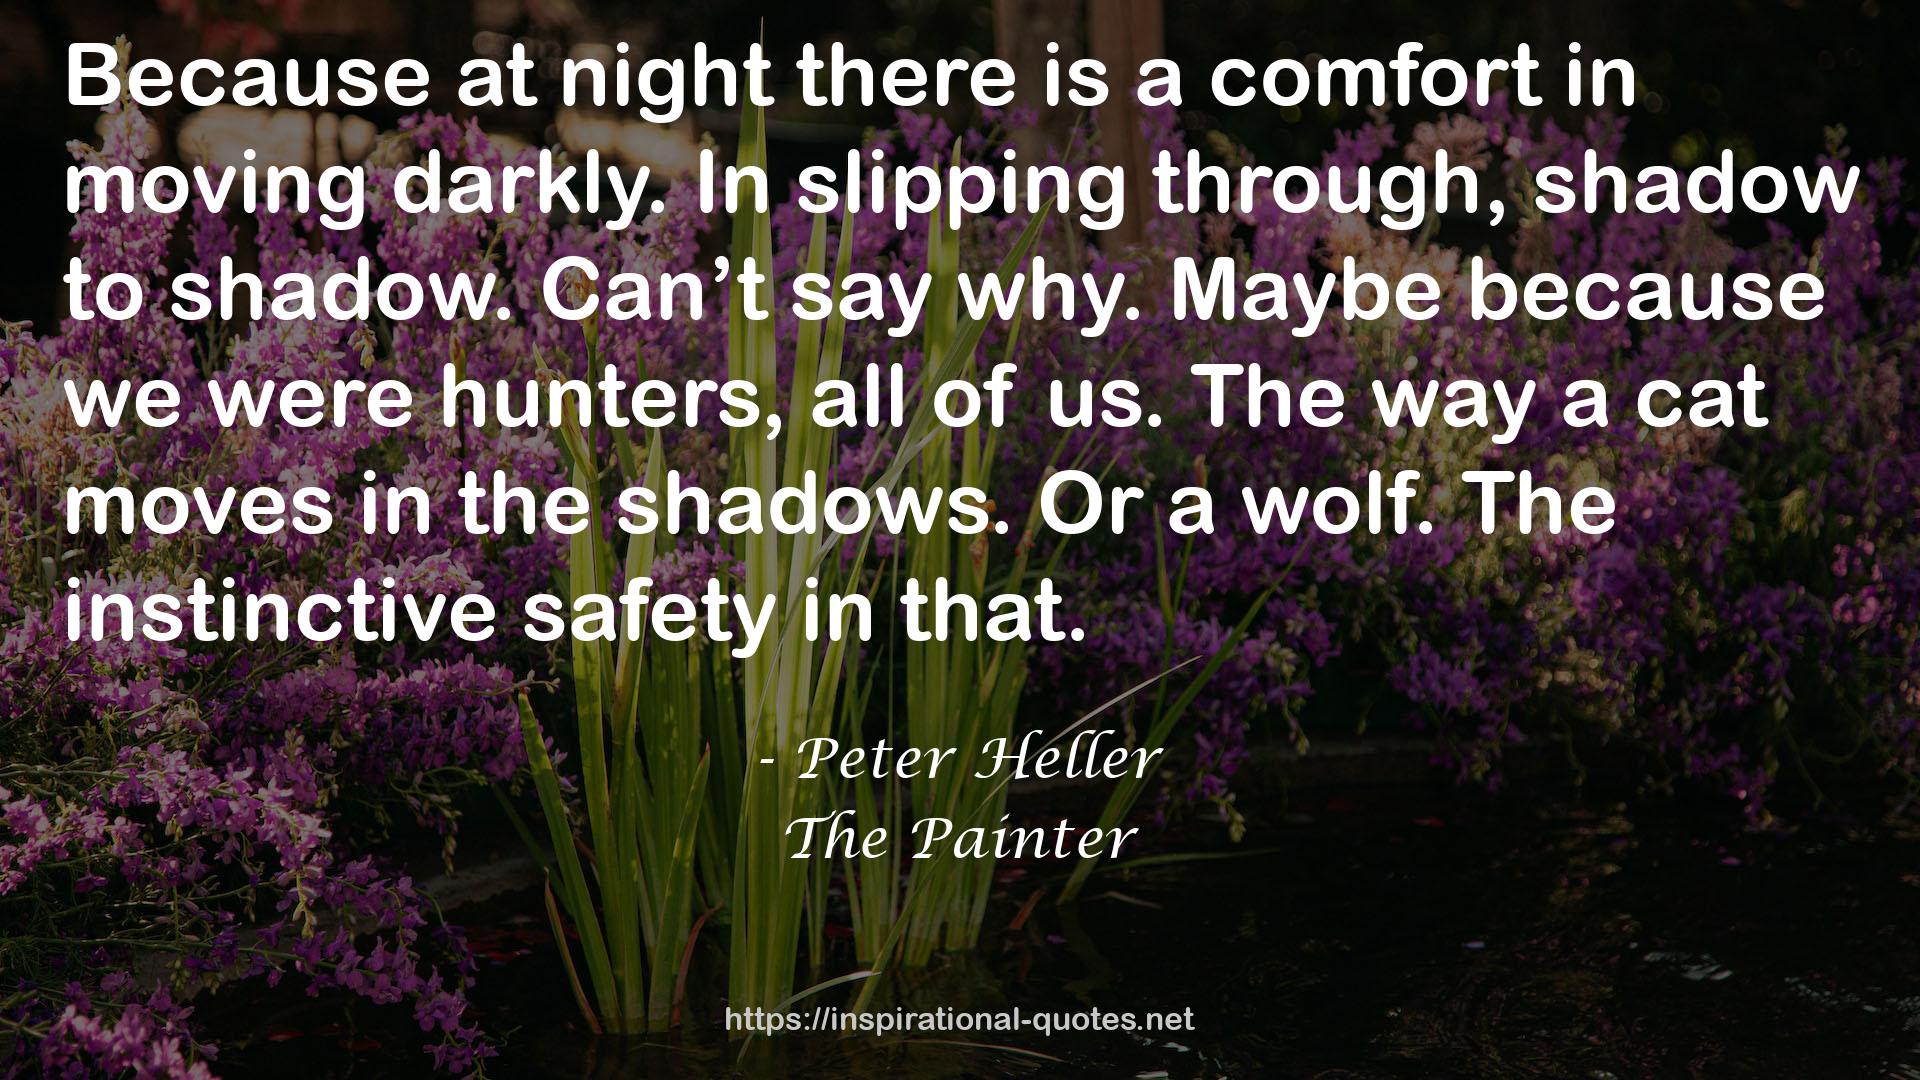 Peter Heller QUOTES